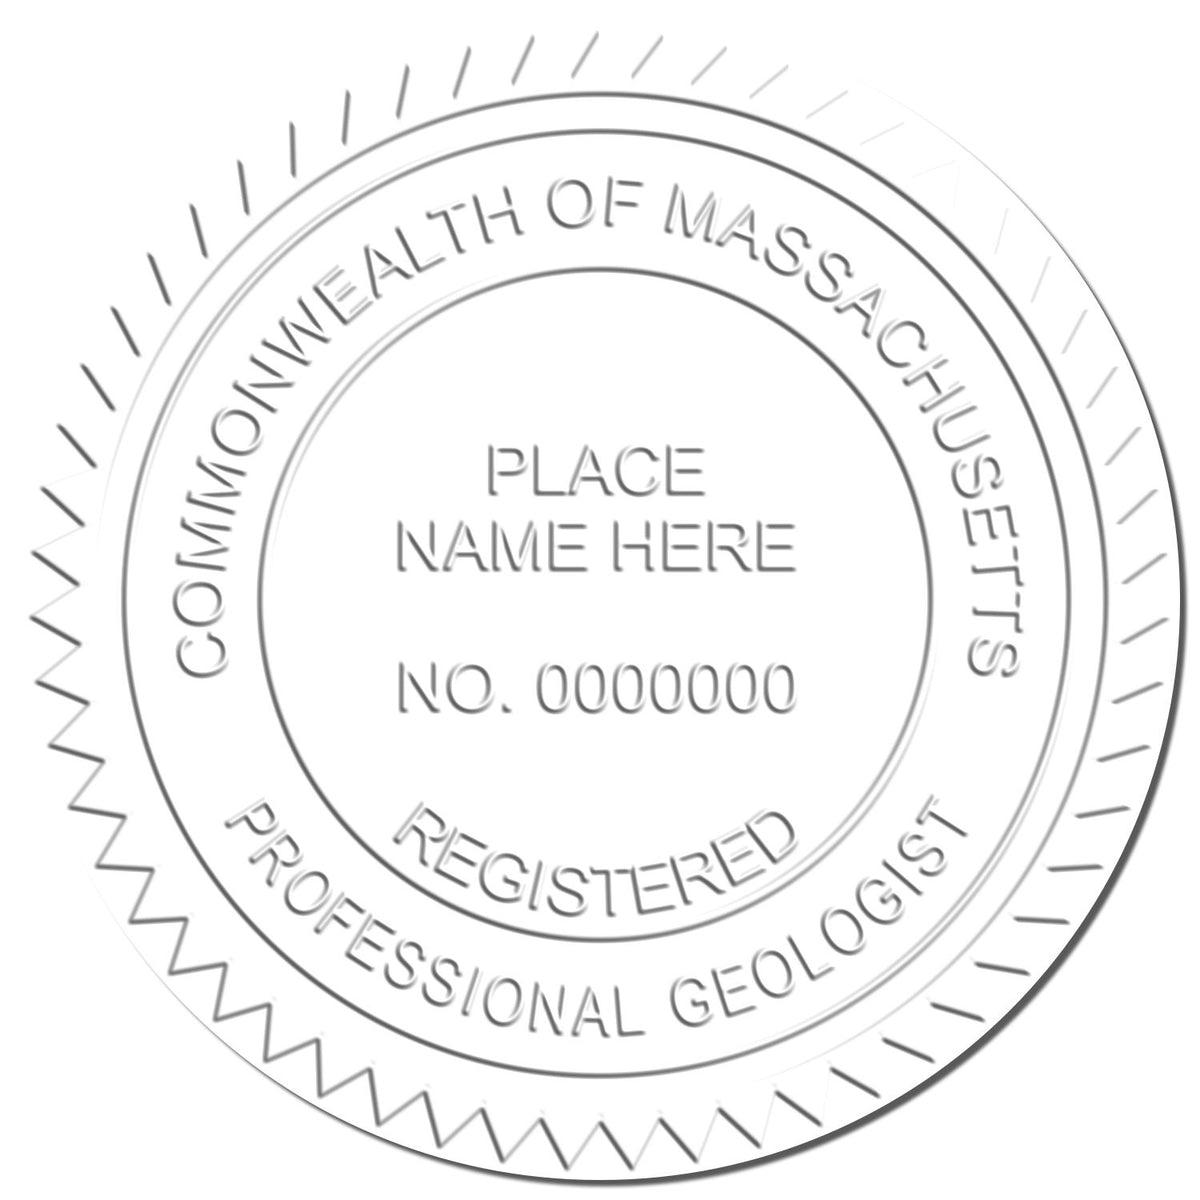 A photograph of the Hybrid Massachusetts Geologist Seal stamp impression reveals a vivid, professional image of the on paper.